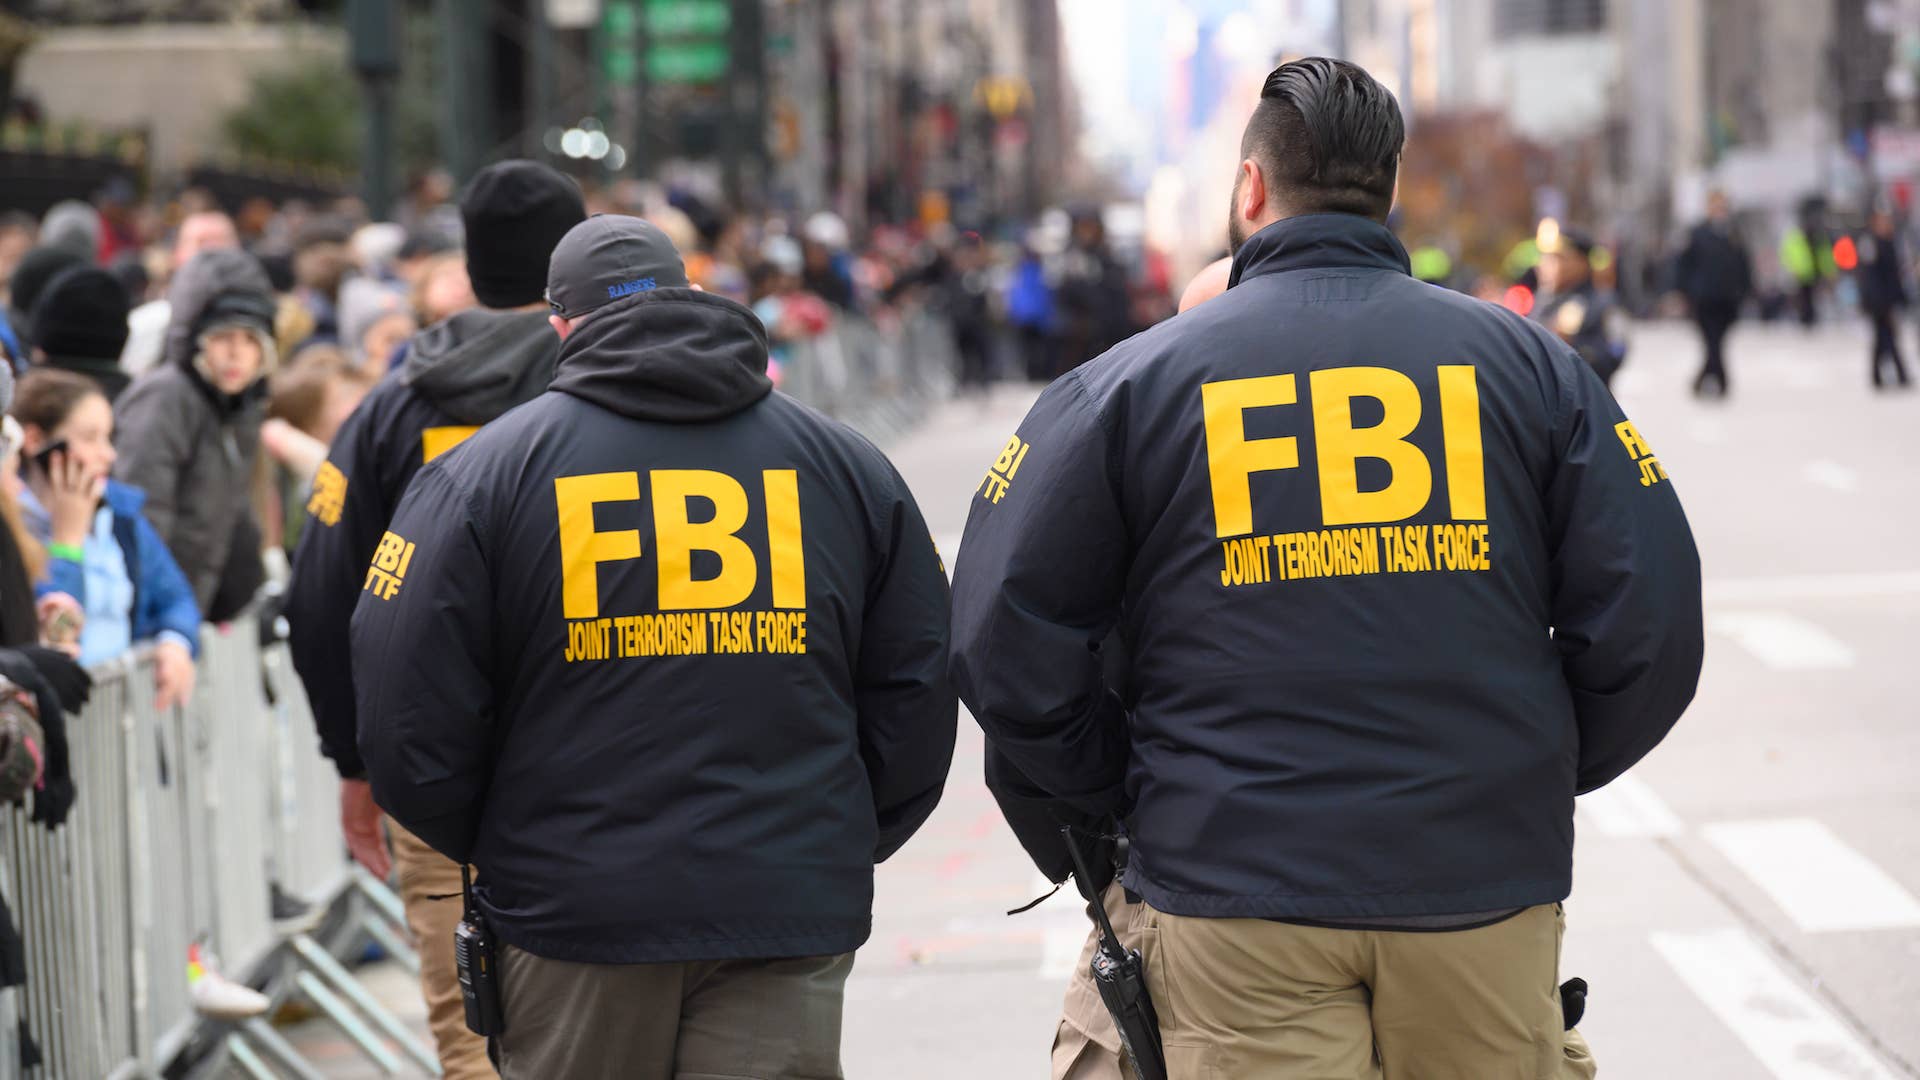 FBI agents are seen at the 93rd Annual Macy's Thanksgiving Day Parade